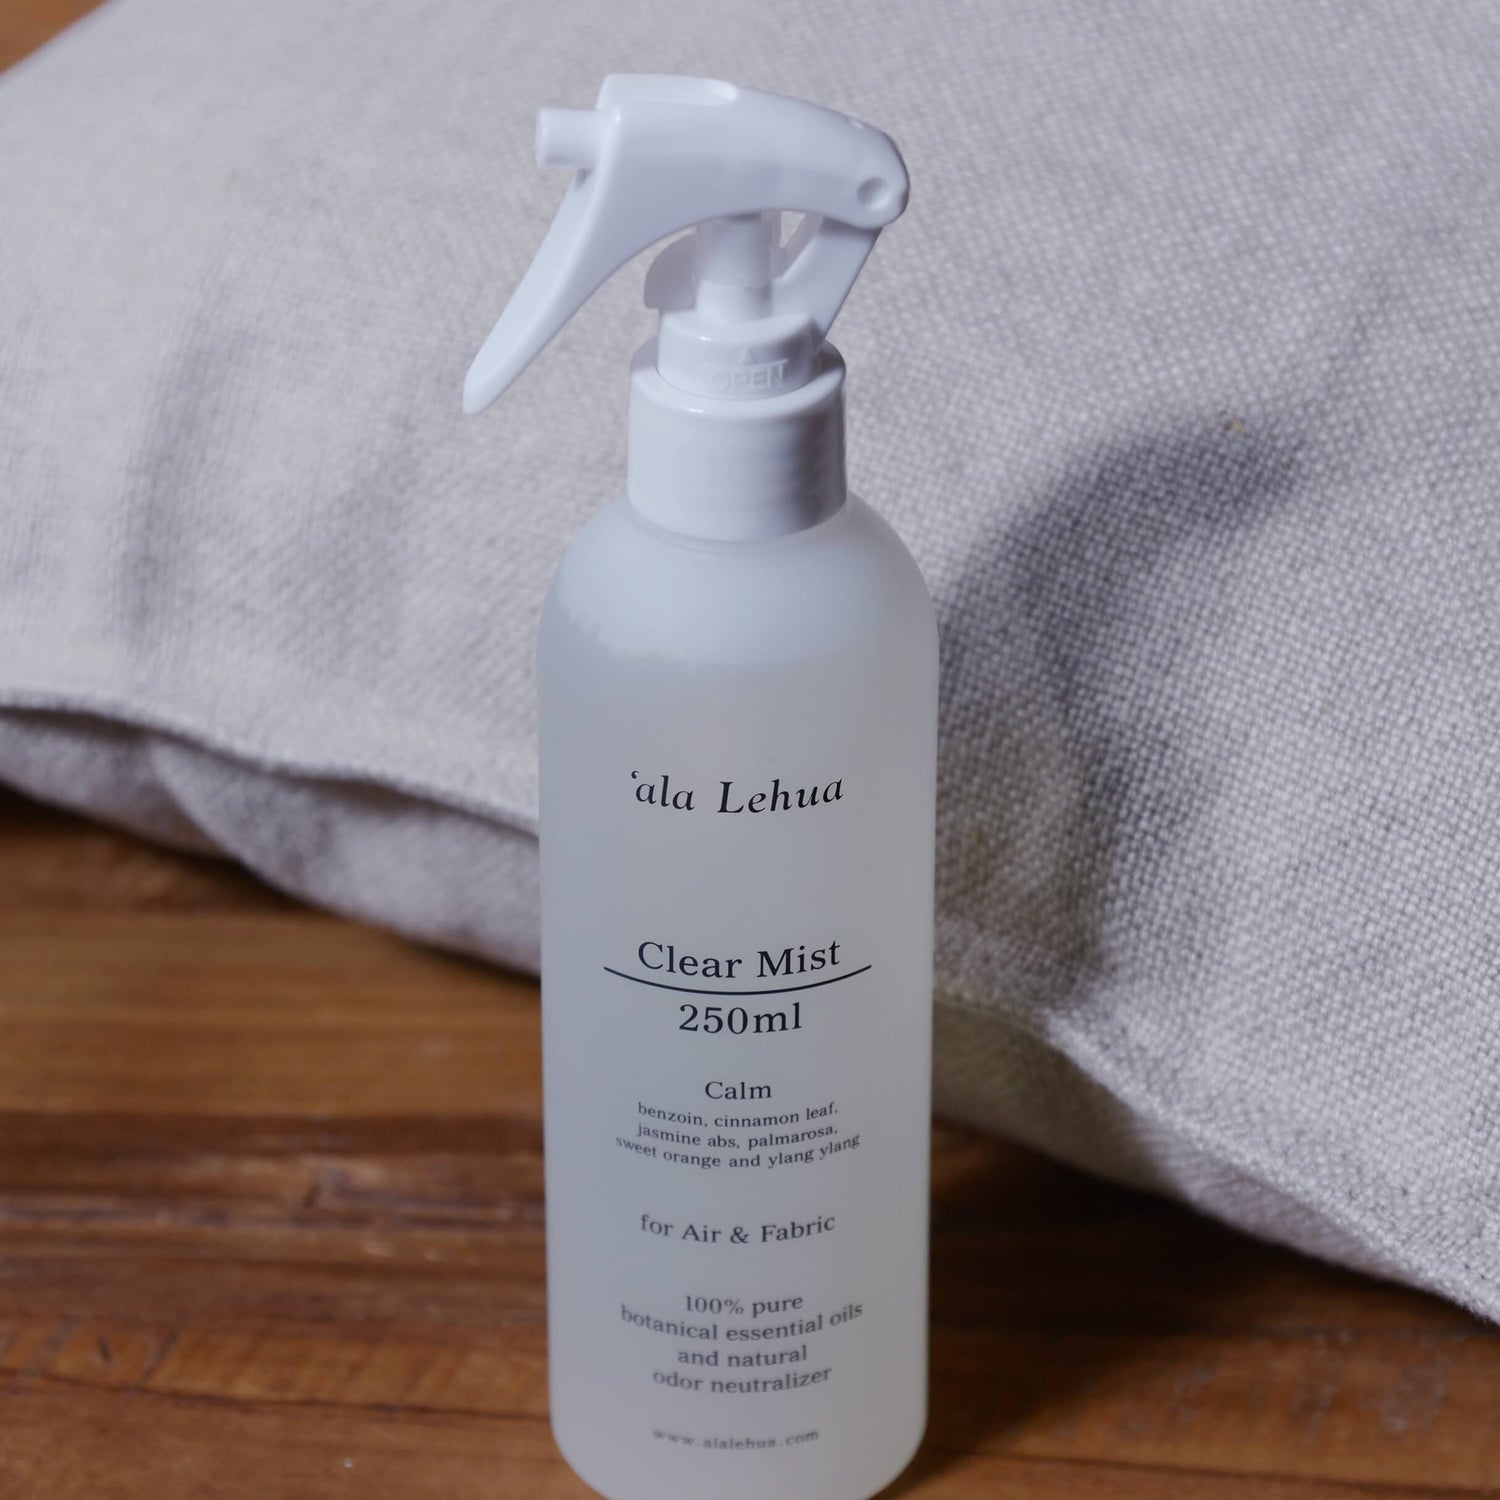 ‘ala Lehua　クリアミスト for Air &amp; Fabric 250ml　Revive（リヴァイブ）